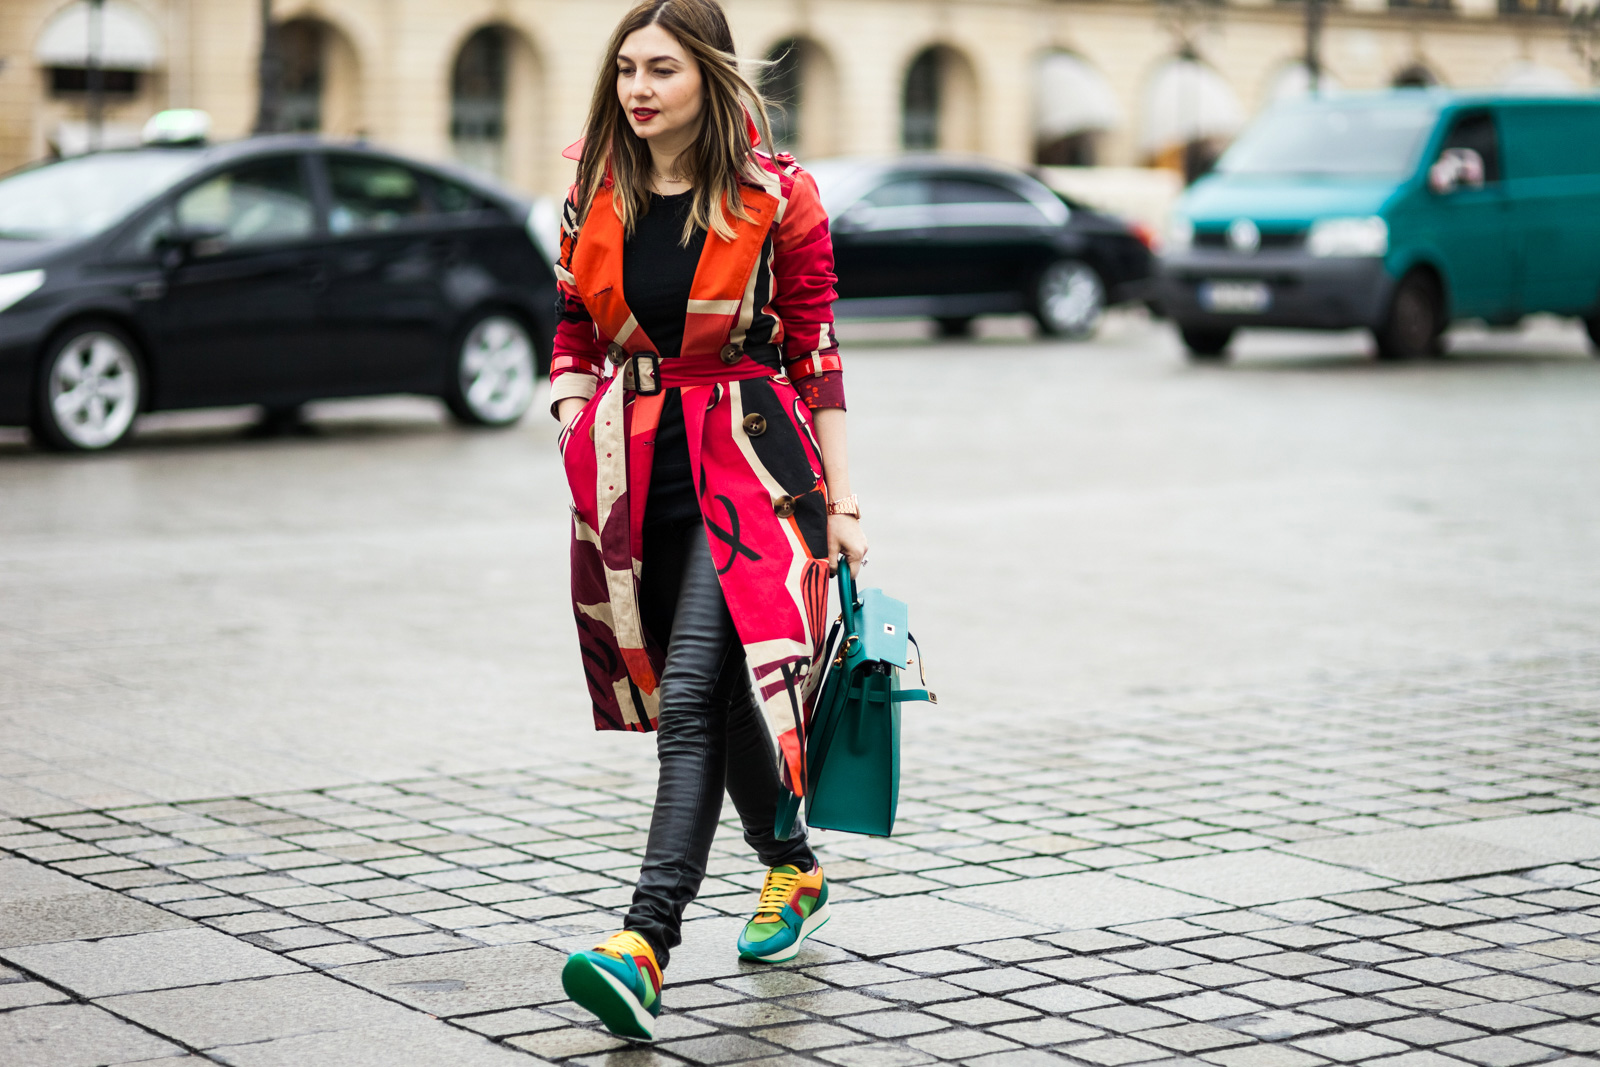 Nasiba Adilova wearing a printed trench coat and sneakers by Burberry Prorsum and a Hermes bag before the Schiaparelli Spring 2015 Haute Couture Fashion show in Paris, France